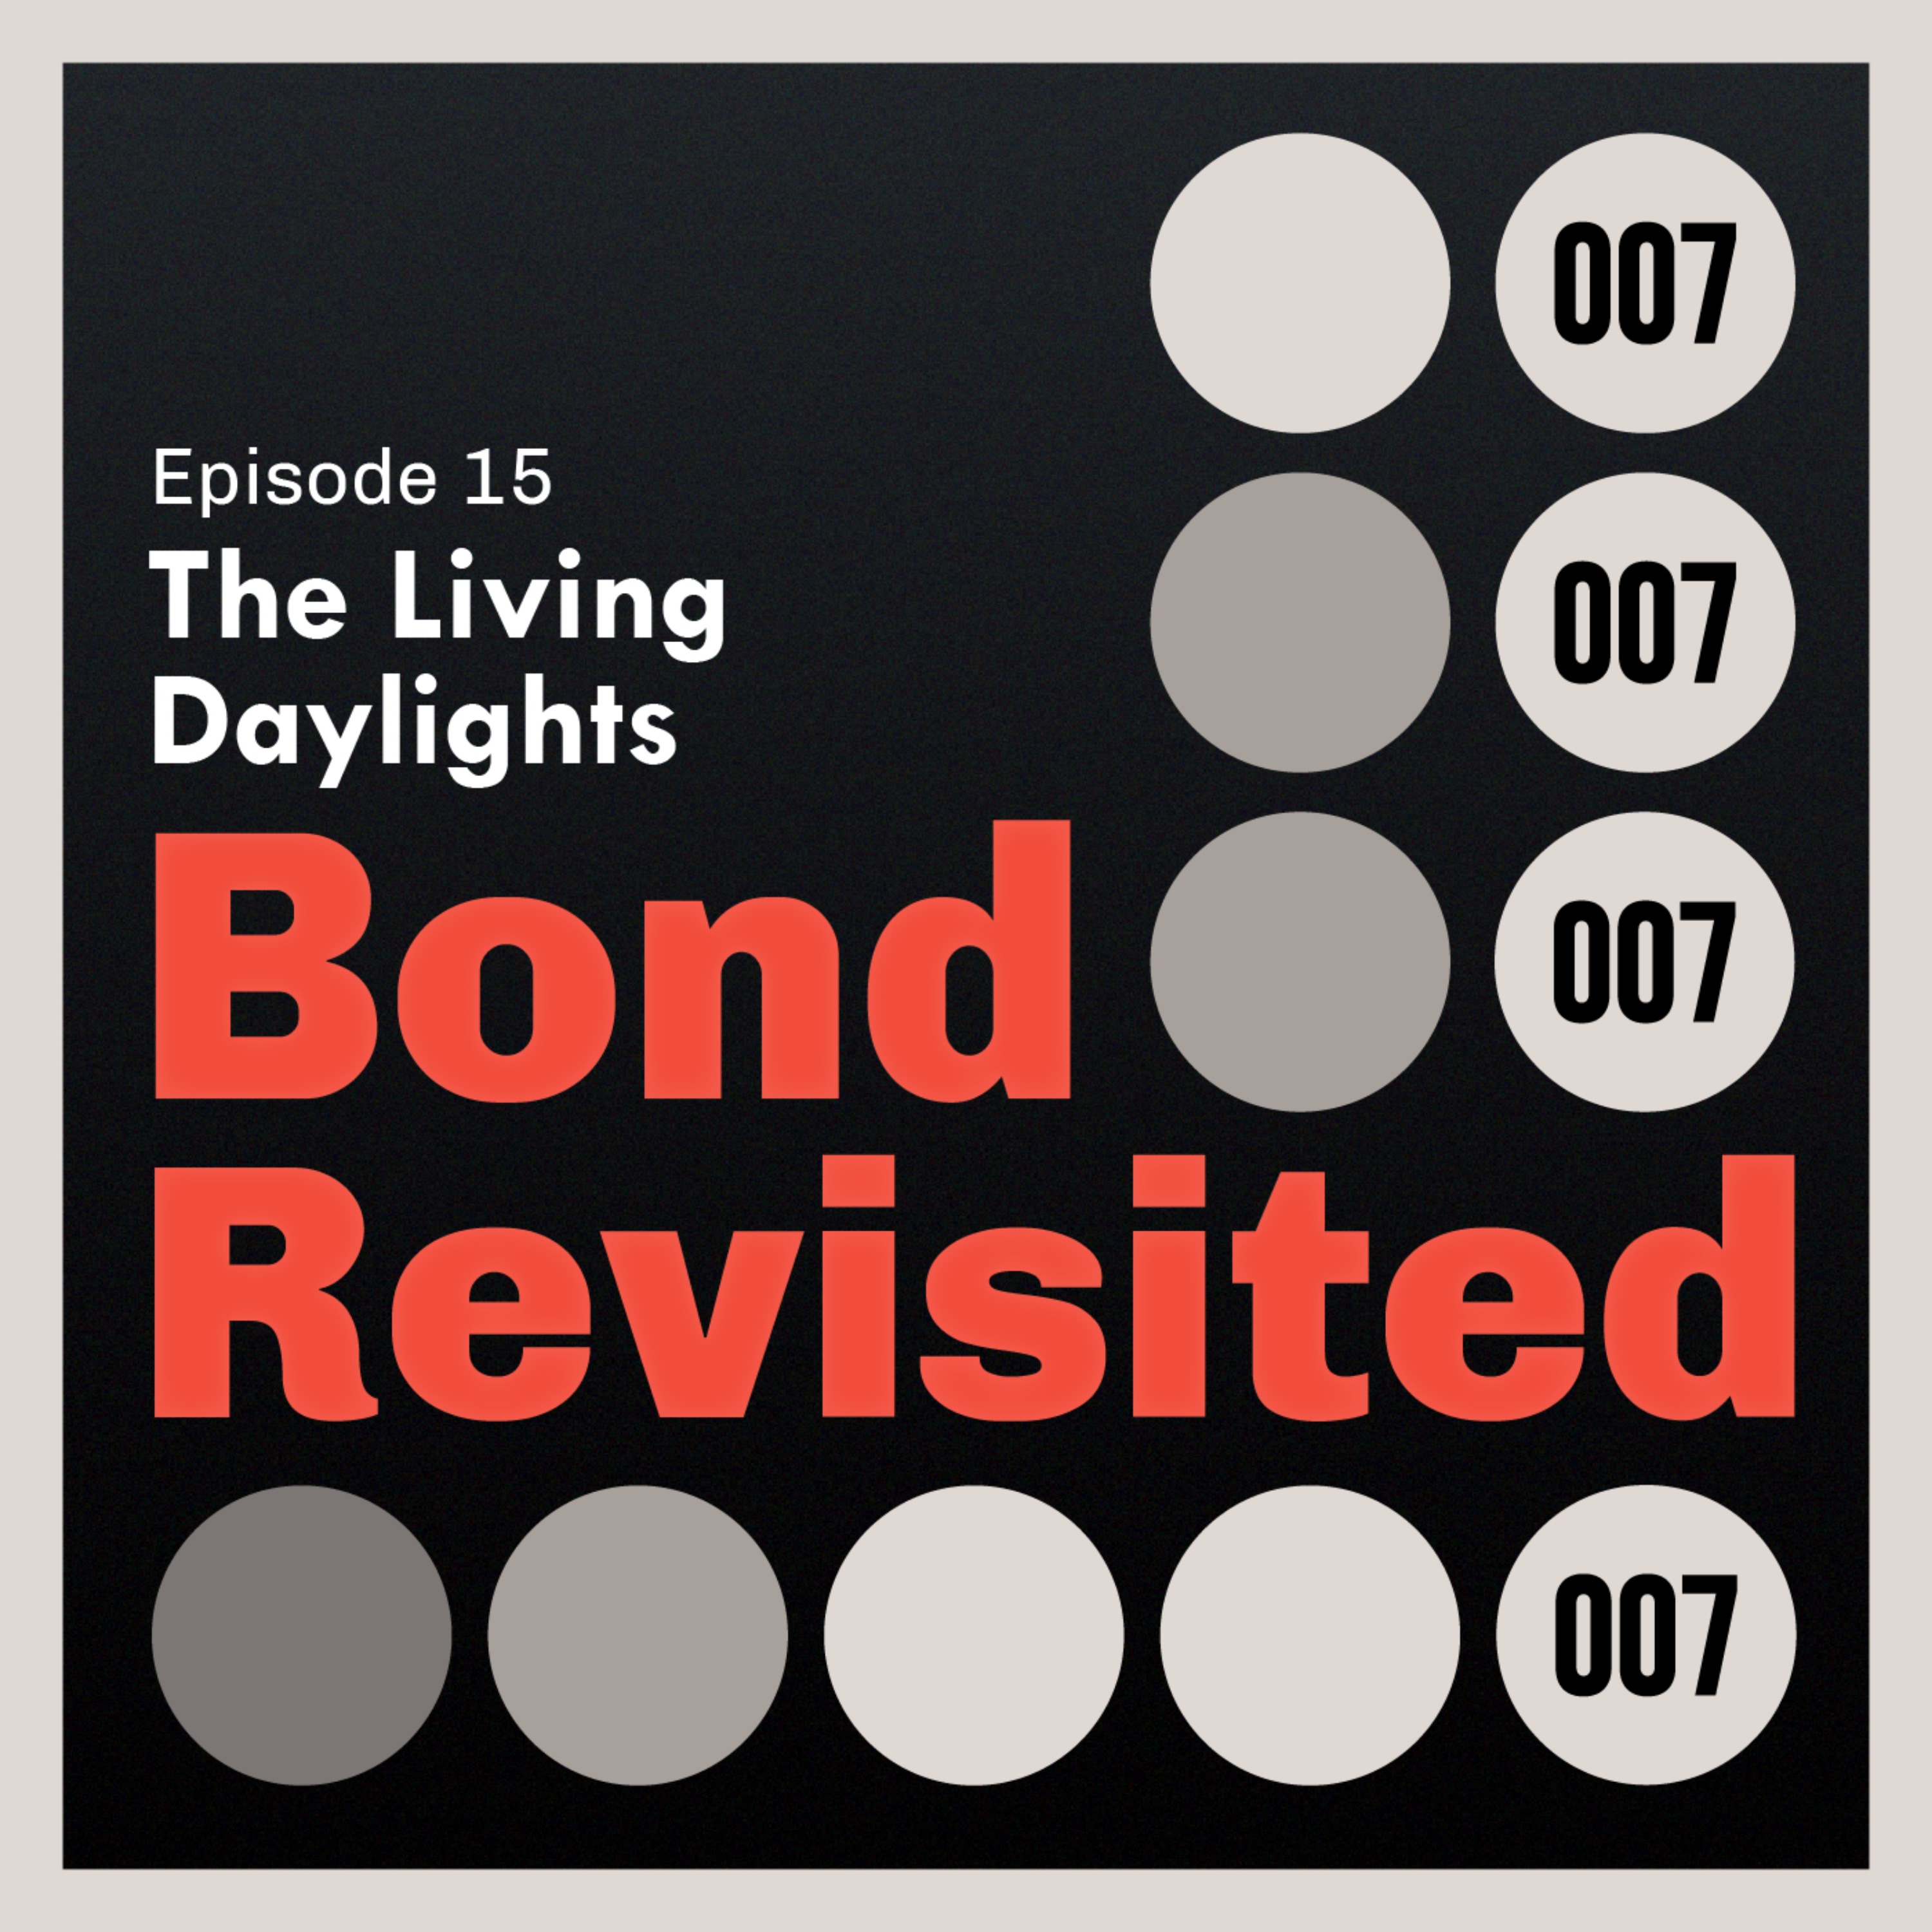 The Living Daylights (Part 1) - Episode 15